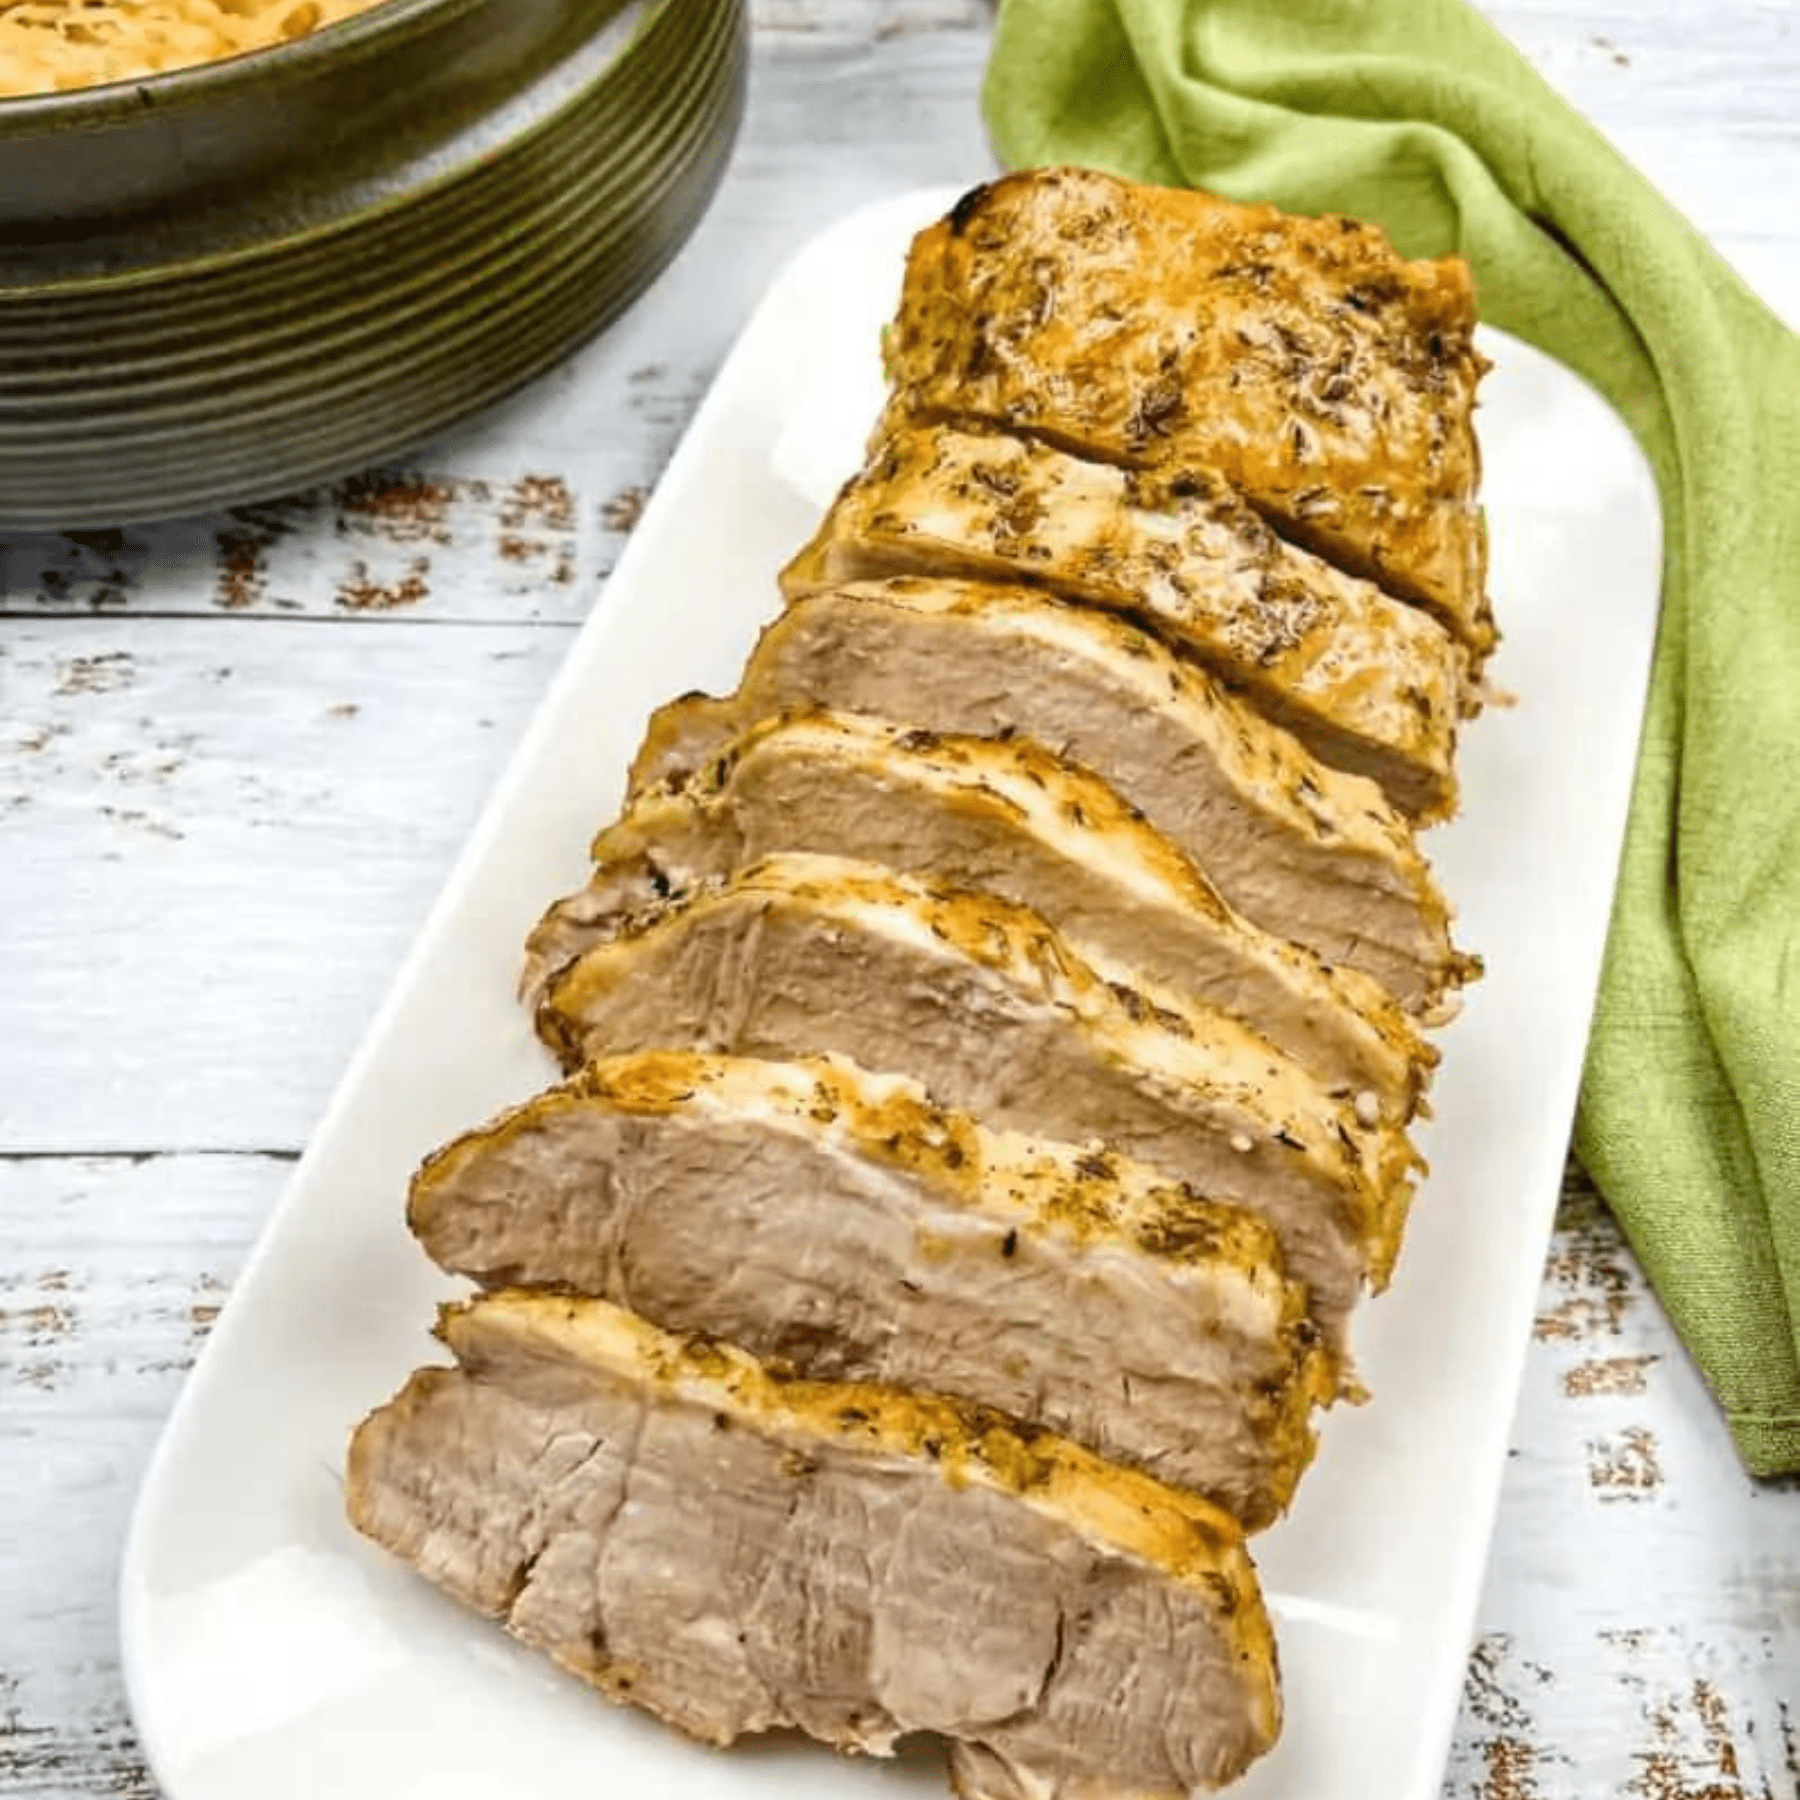 German pork loin with mustard on a white platter.